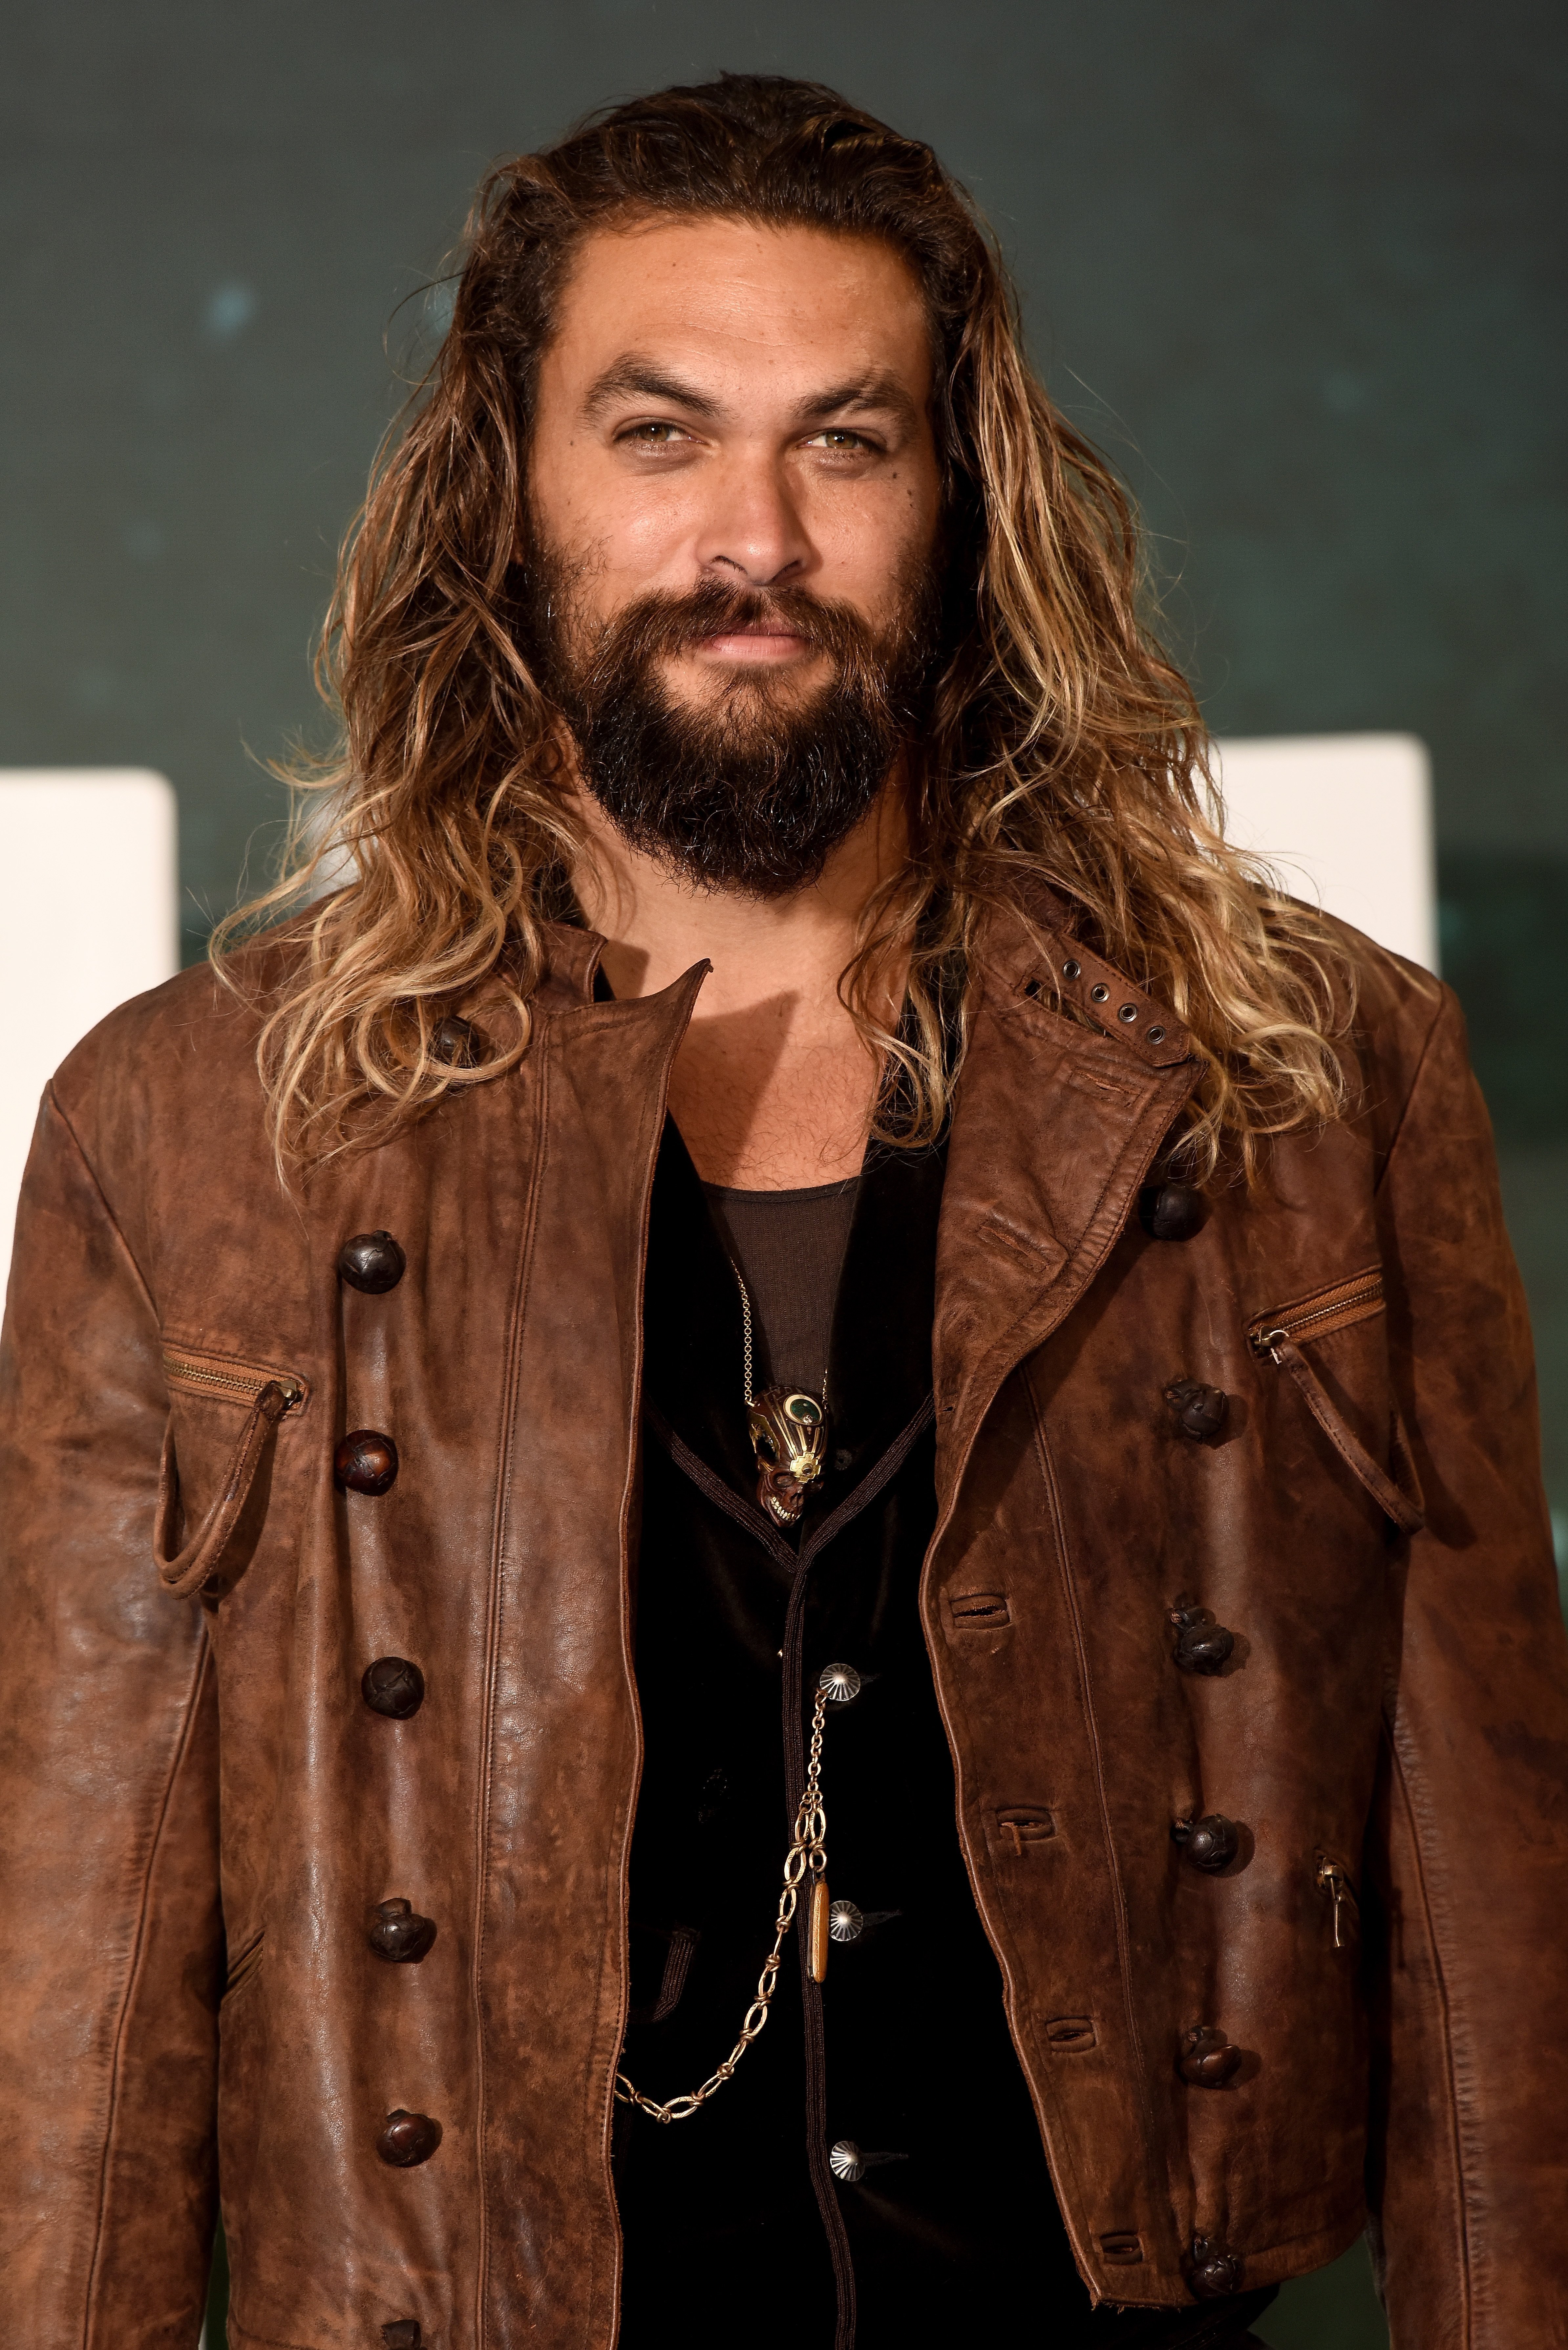 Jason Momoa attending the "Justice League" photocall in November 2017. | Photo: Getty Images